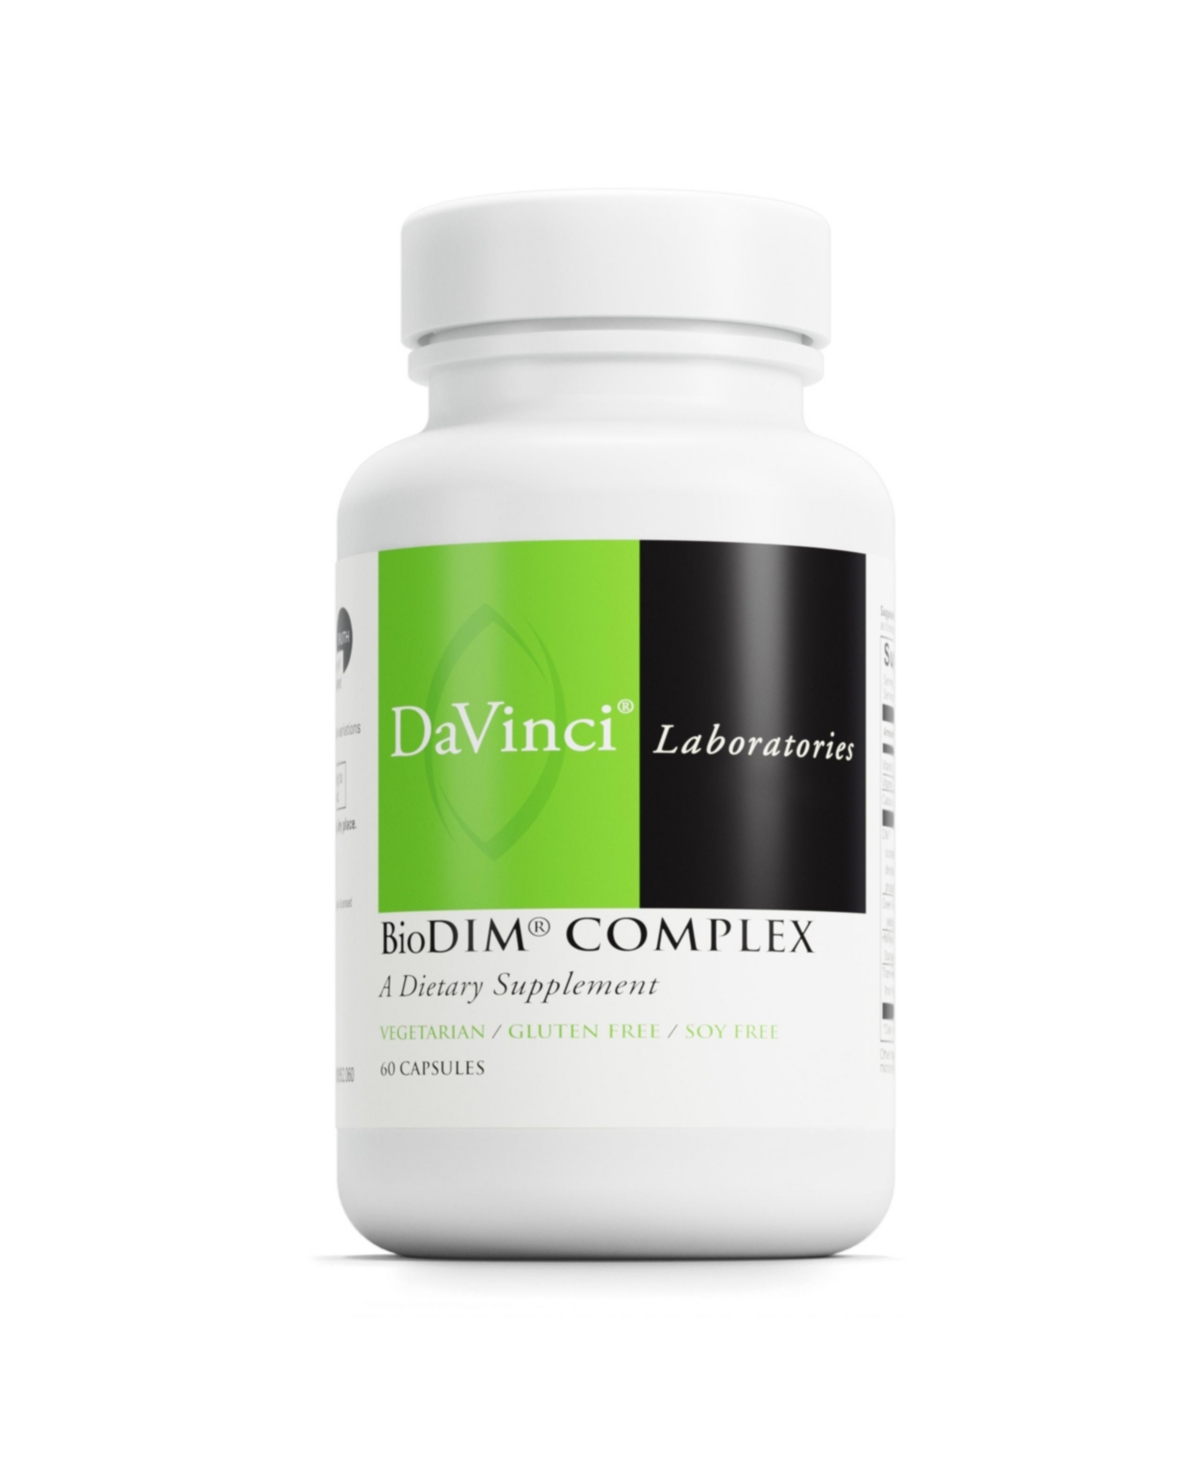 DaVinci Labs BioDIM Complex - Antioxidant Supplement to Support Cellular Health and Hormone Balance for Women and Men - With Vita